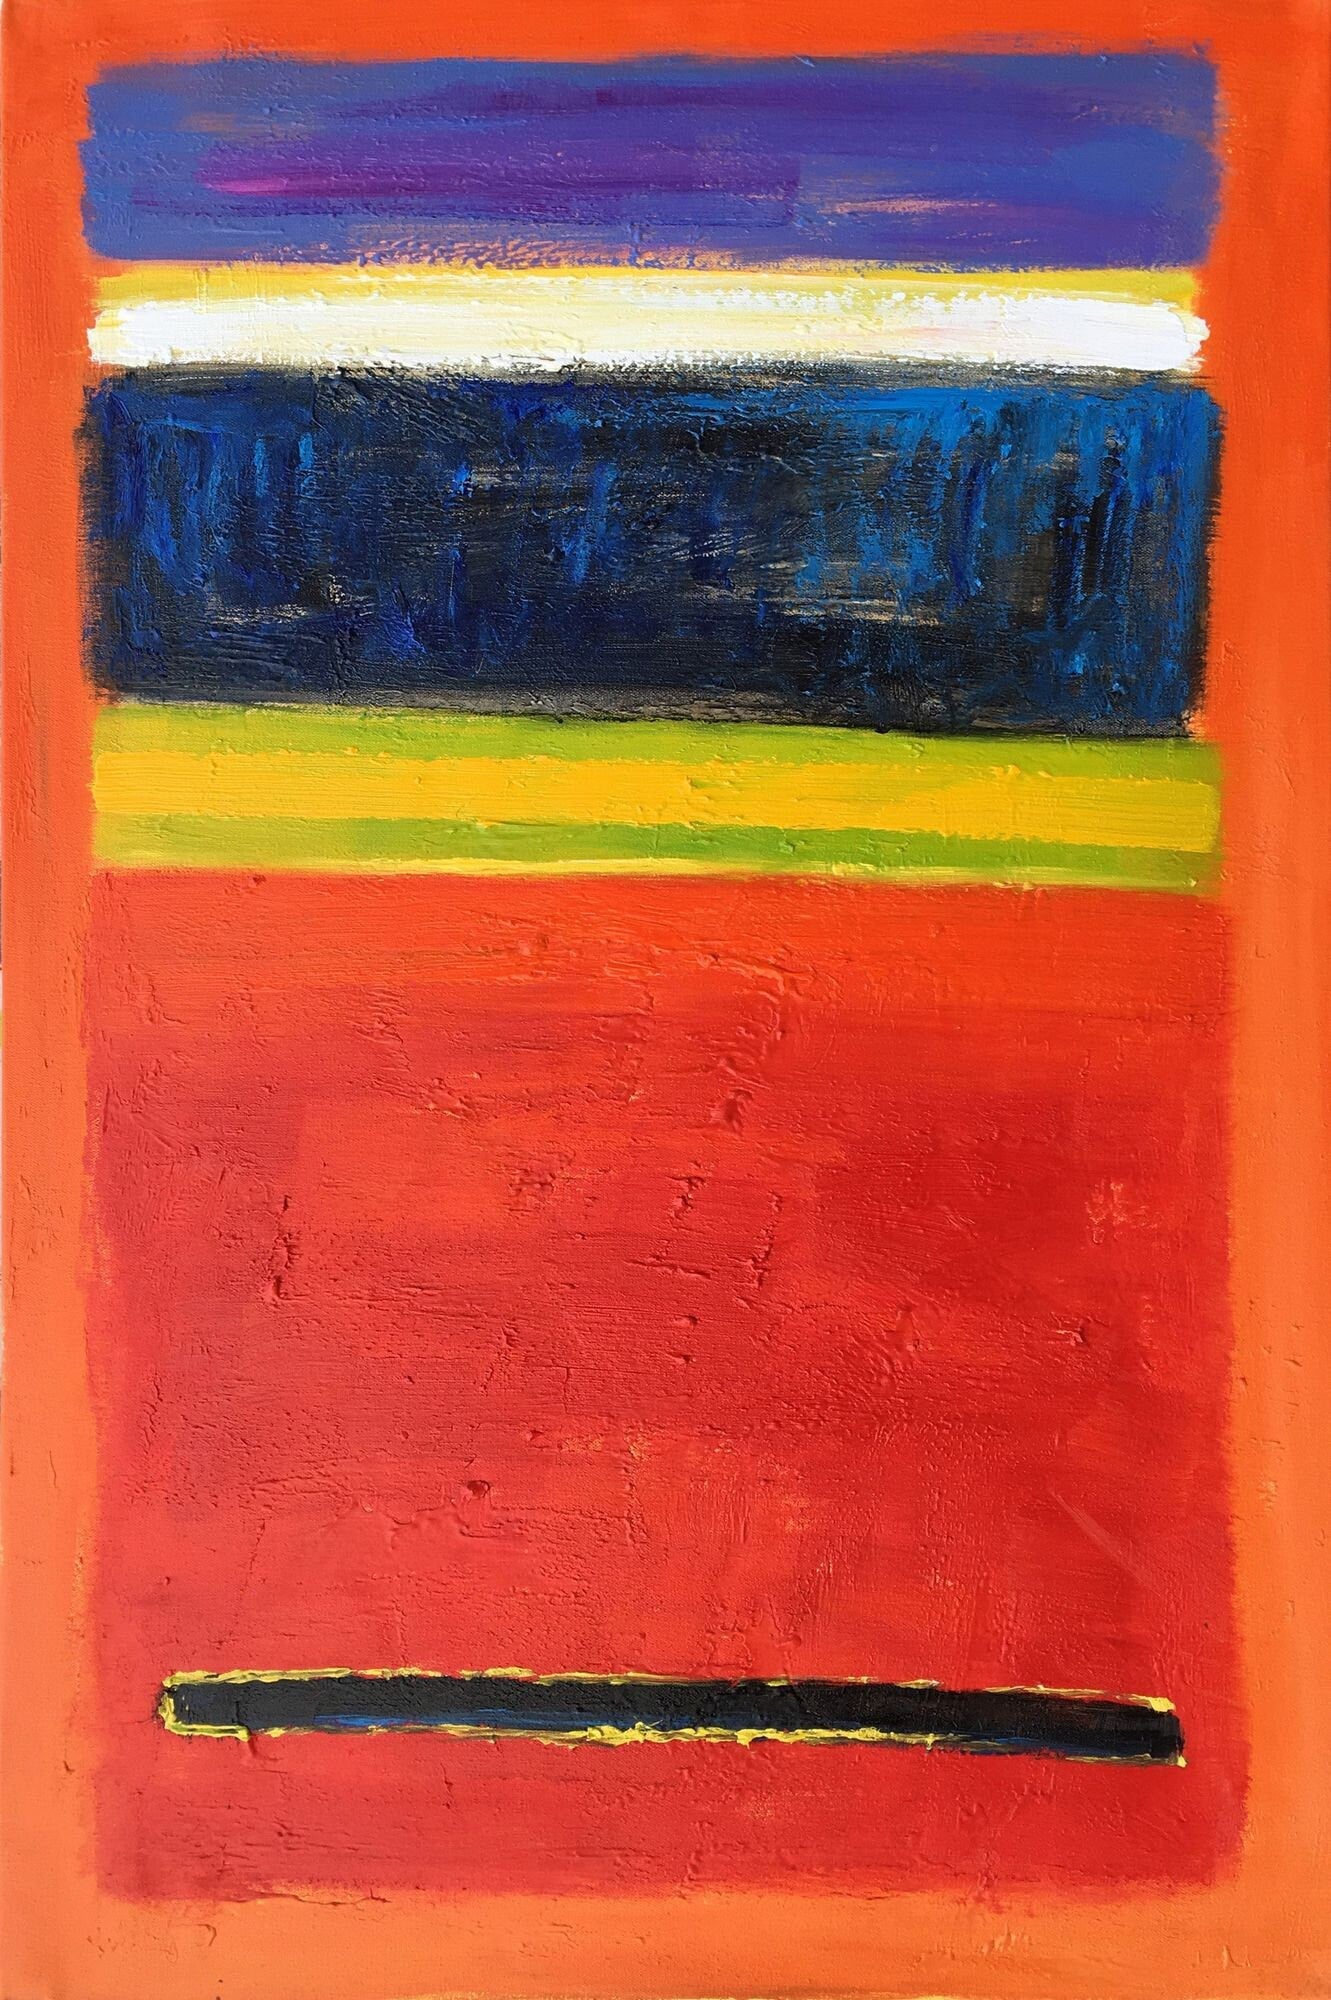 Large Abstract Oil Painting Orange Red, Mark Rothko, Abstract Canvas Art, Large Painting, Kitchen Wall Decor, Original Artwork, Modern Art